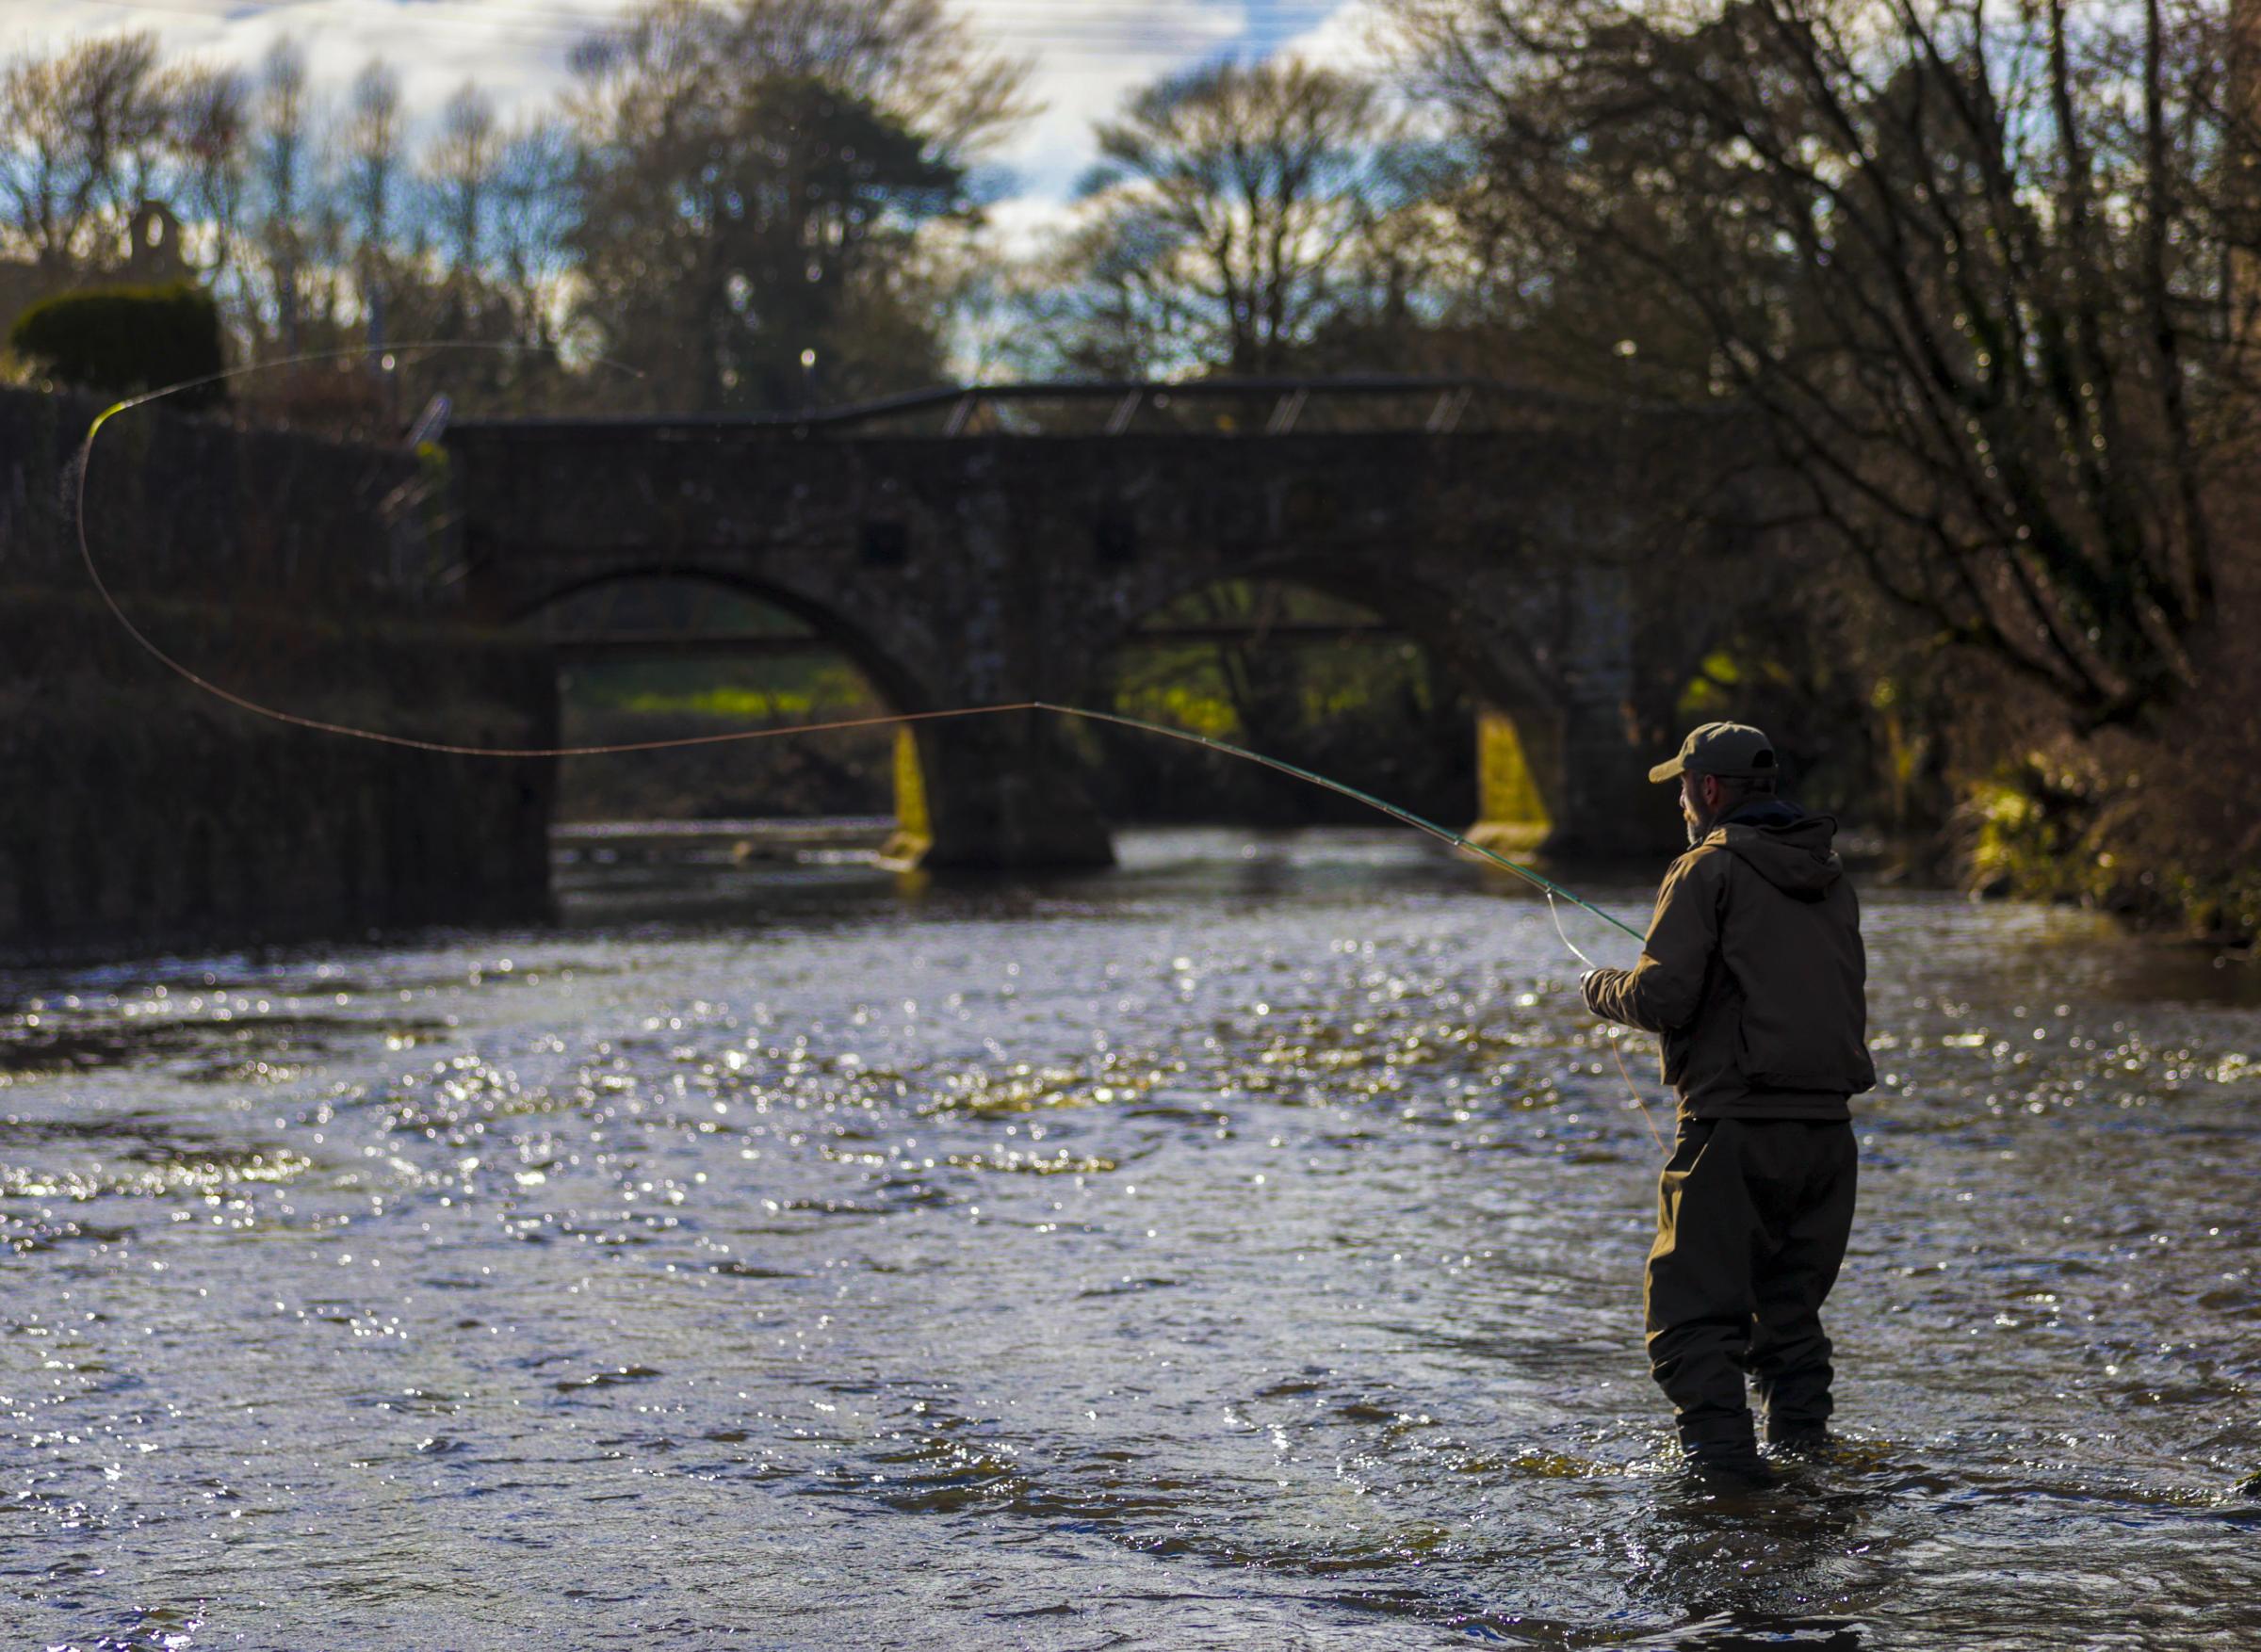 An angler fishing on The Colebrooke River.